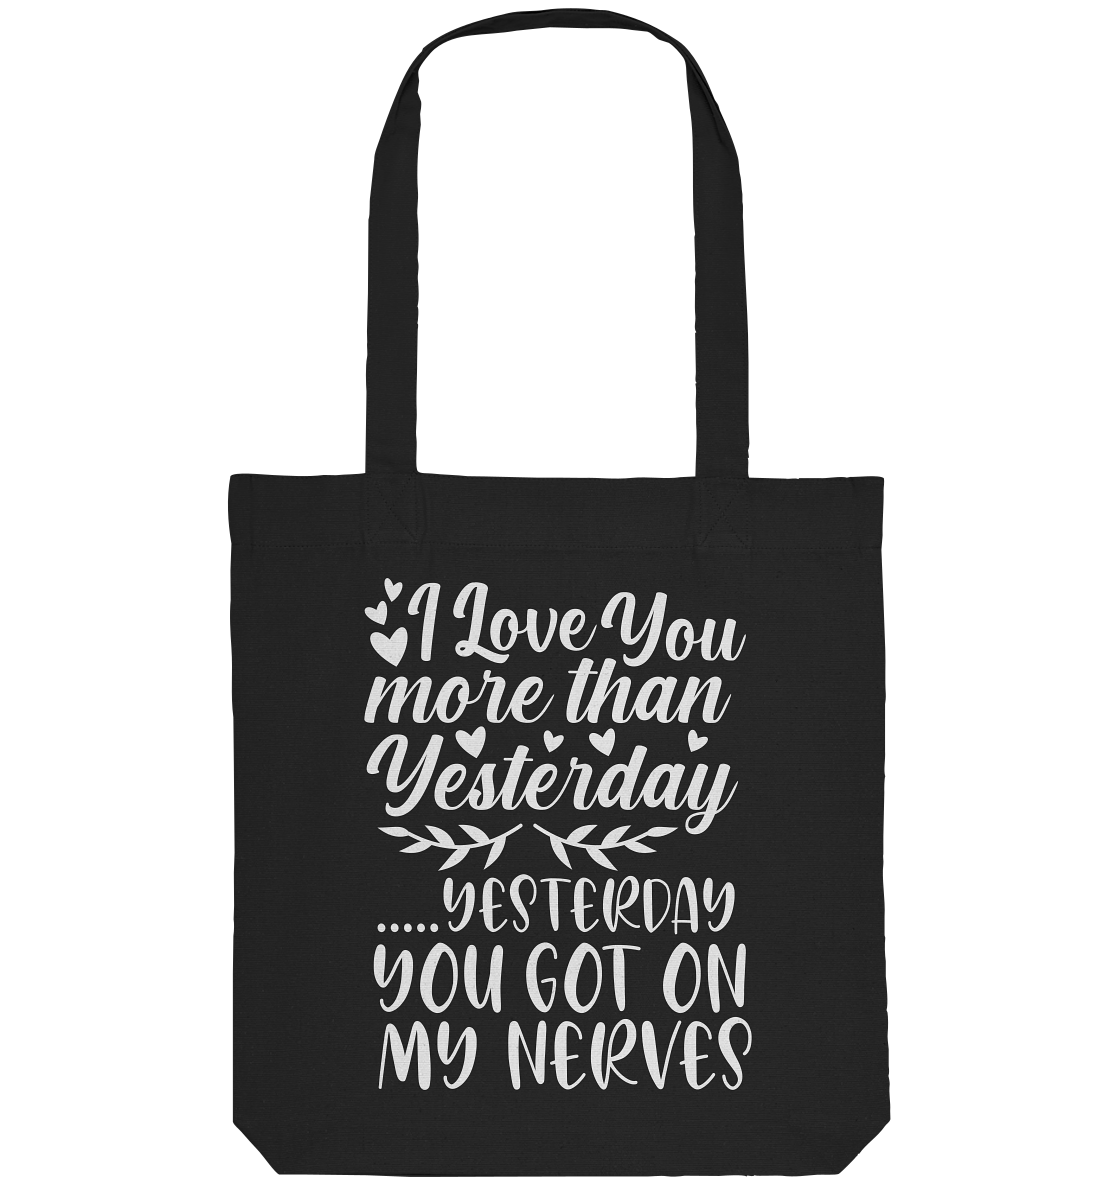 I love you more than yesterday - Organic Tote Bag